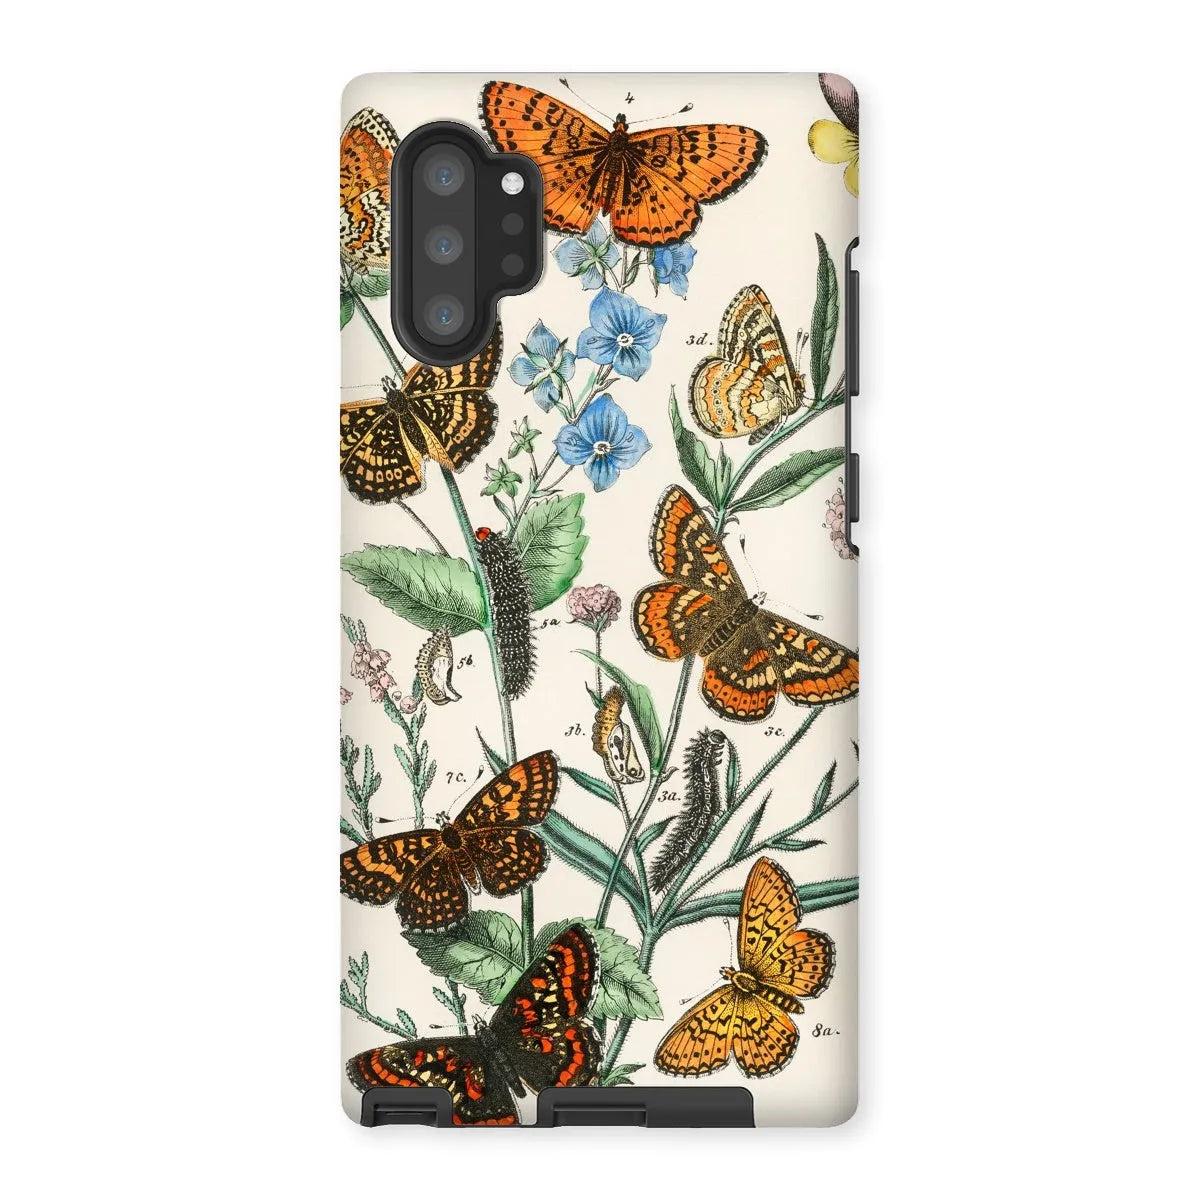 This Butterfly Aesthetic Art Phone Case - William Forsell Kirby - Samsung Galaxy Note 10p / Matte - Mobile Phone Cases